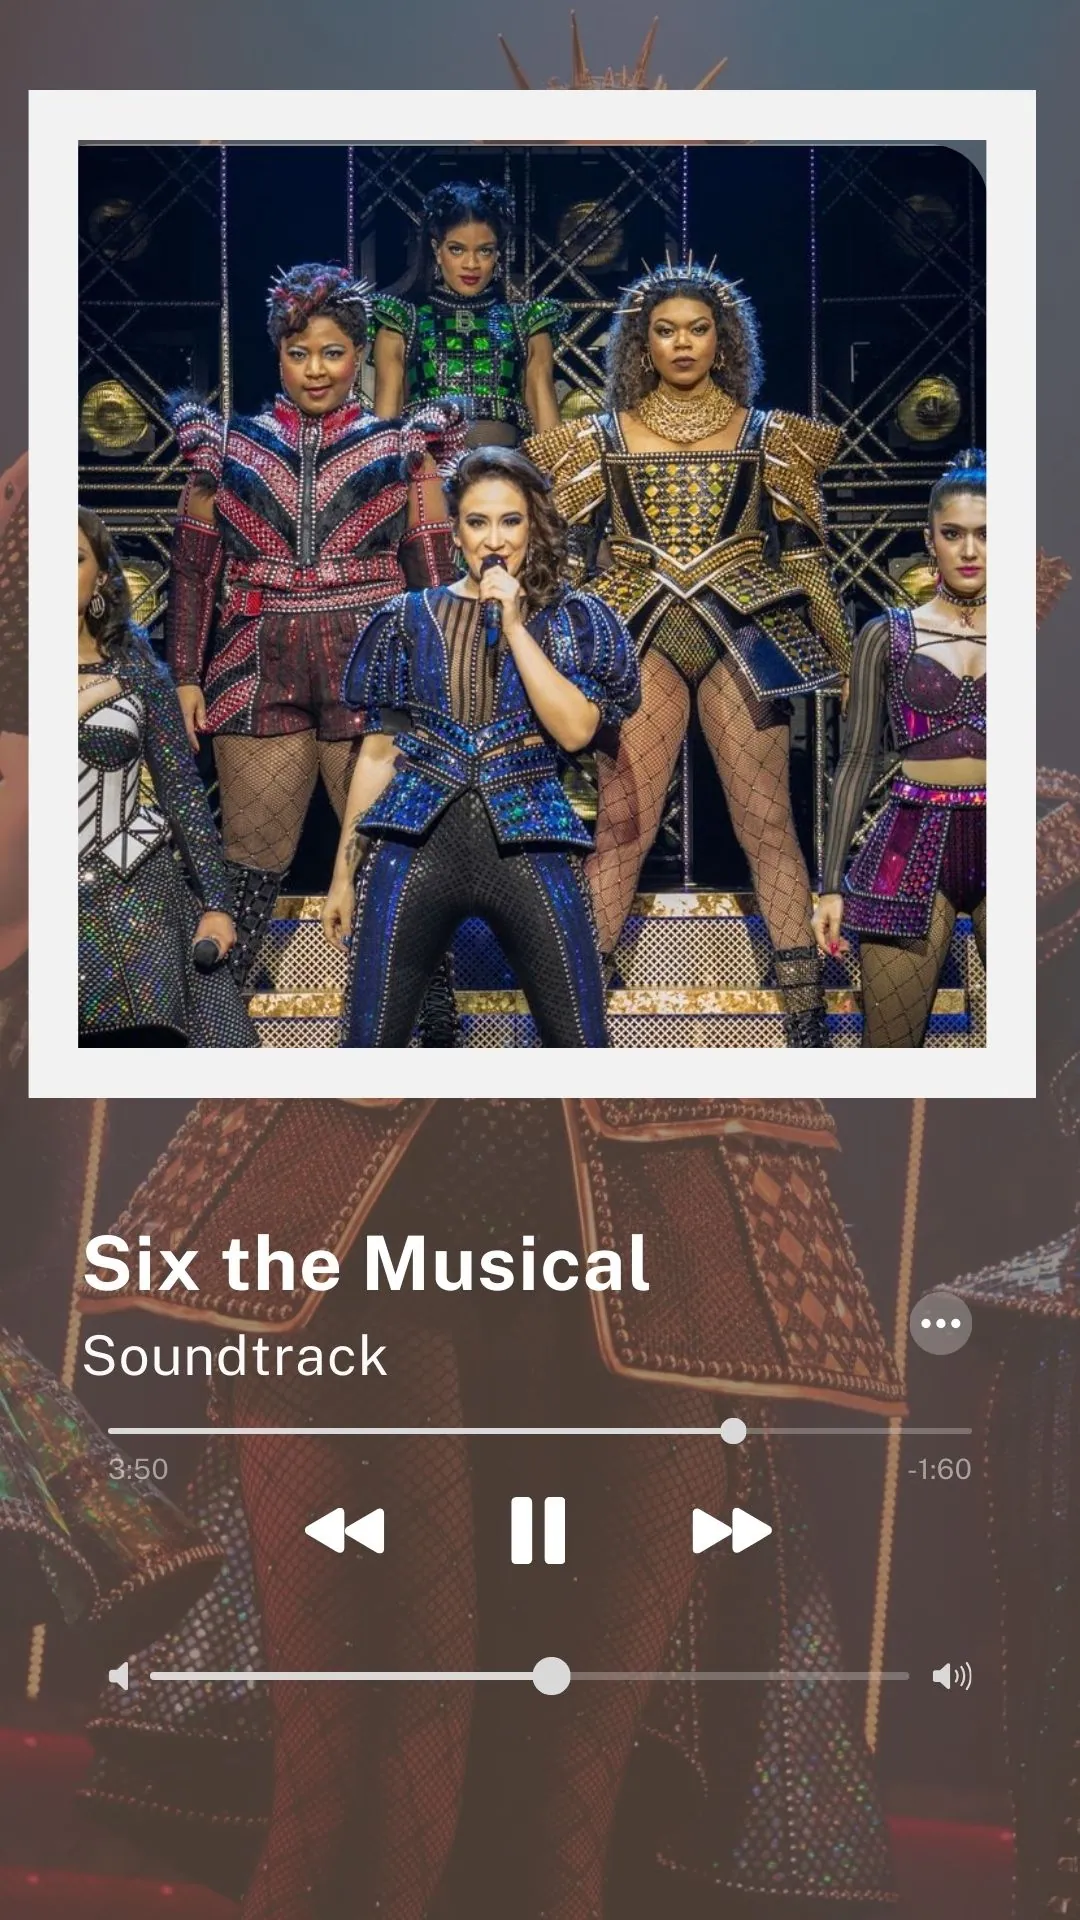 Six the Musical Soundtrack